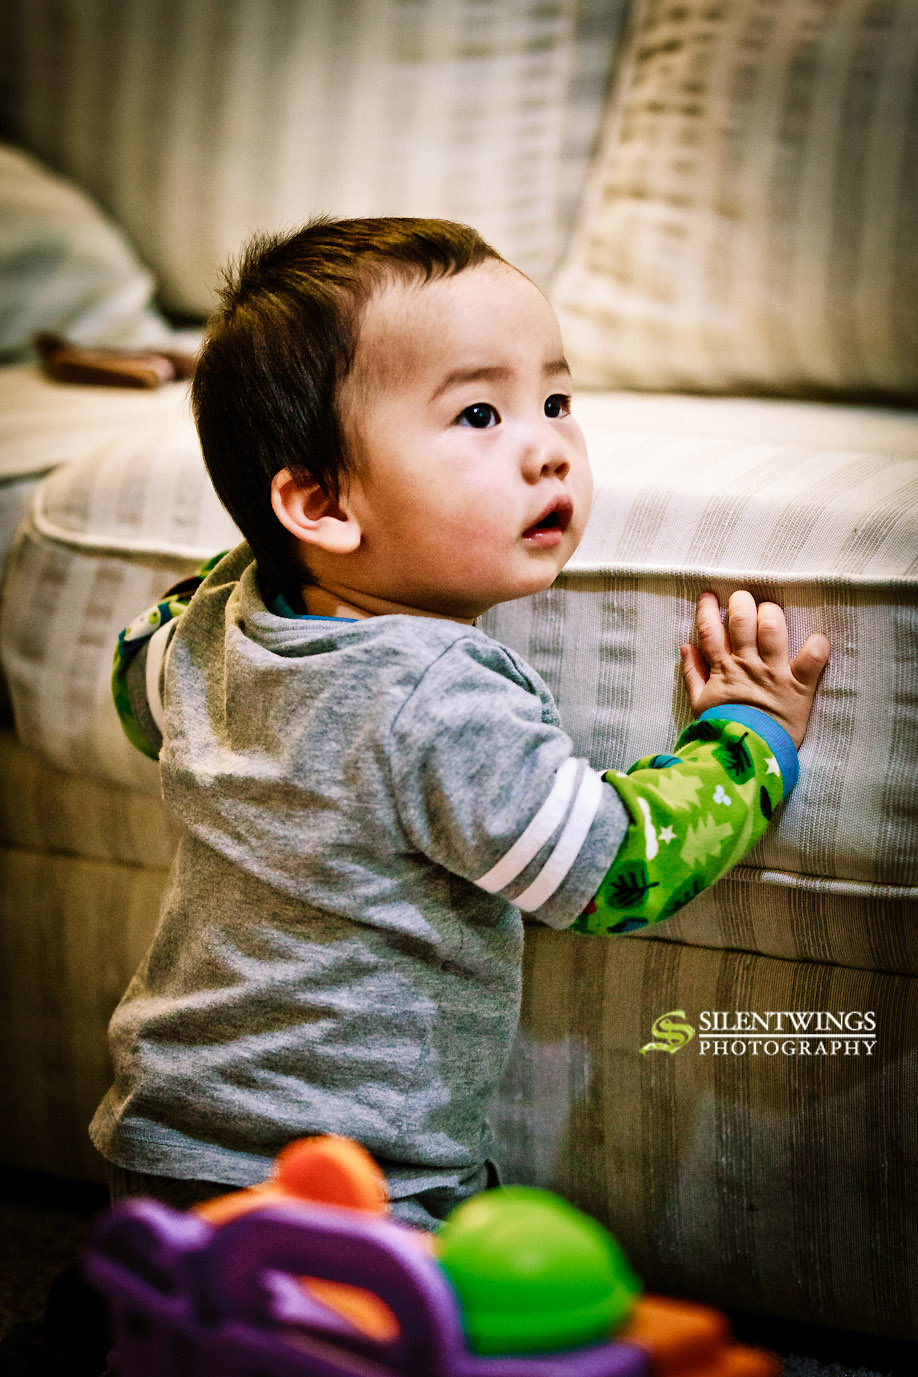 Wesley Luo, Jiazhao Cai, Junhang Luo, Macungie, PA, Portrait, Children, Silentwings Photography